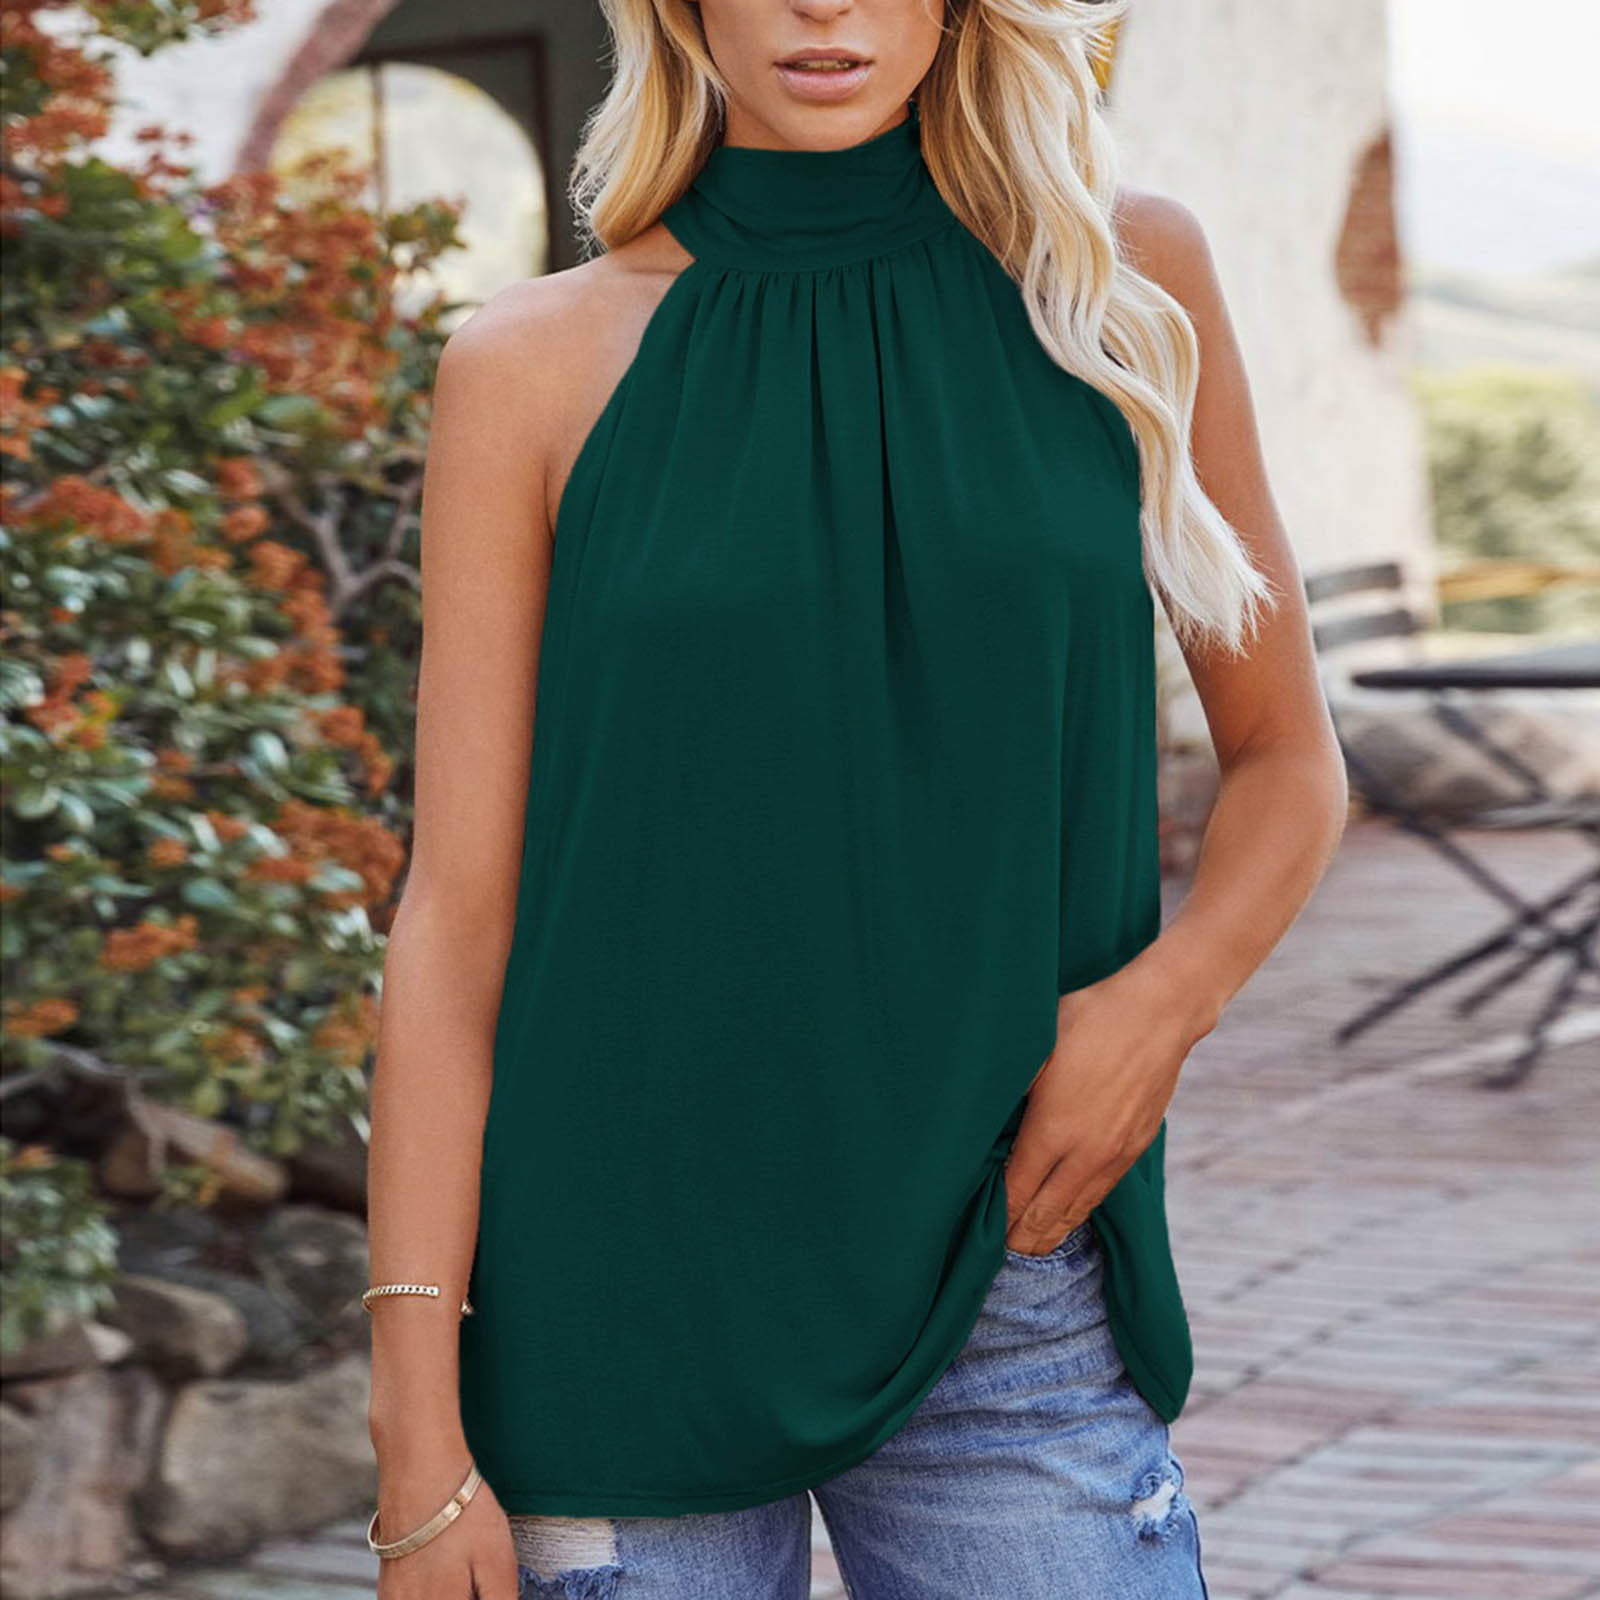 Wycnly Womens Tank Tops Summer Solid Halter Sleeveless T Shirts Beach Off  Shoulder Loose Flowy Lightweight Vest Blouses Green m Clearance Under $5